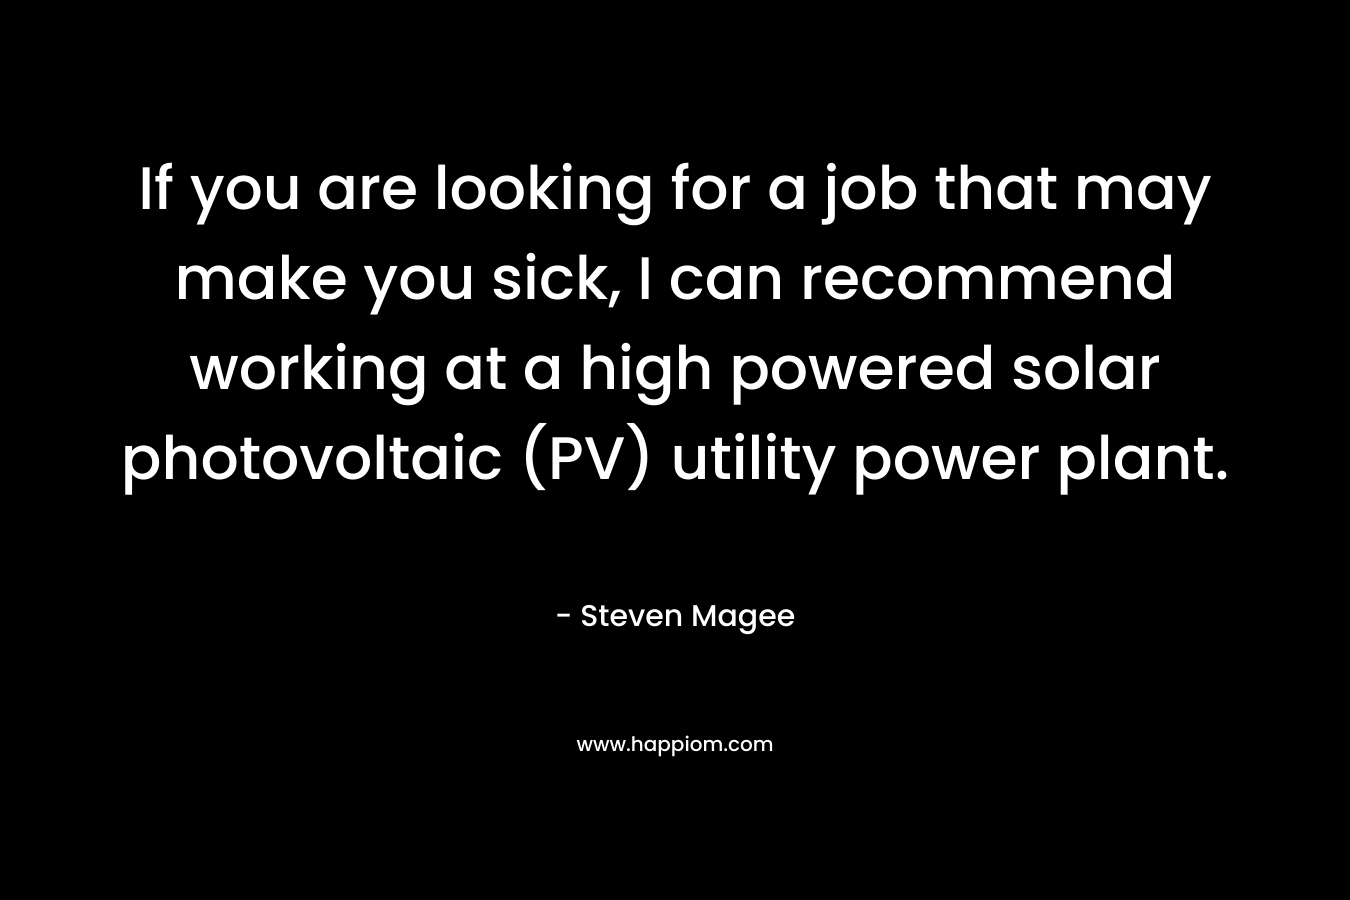 If you are looking for a job that may make you sick, I can recommend working at a high powered solar photovoltaic (PV) utility power plant. – Steven Magee